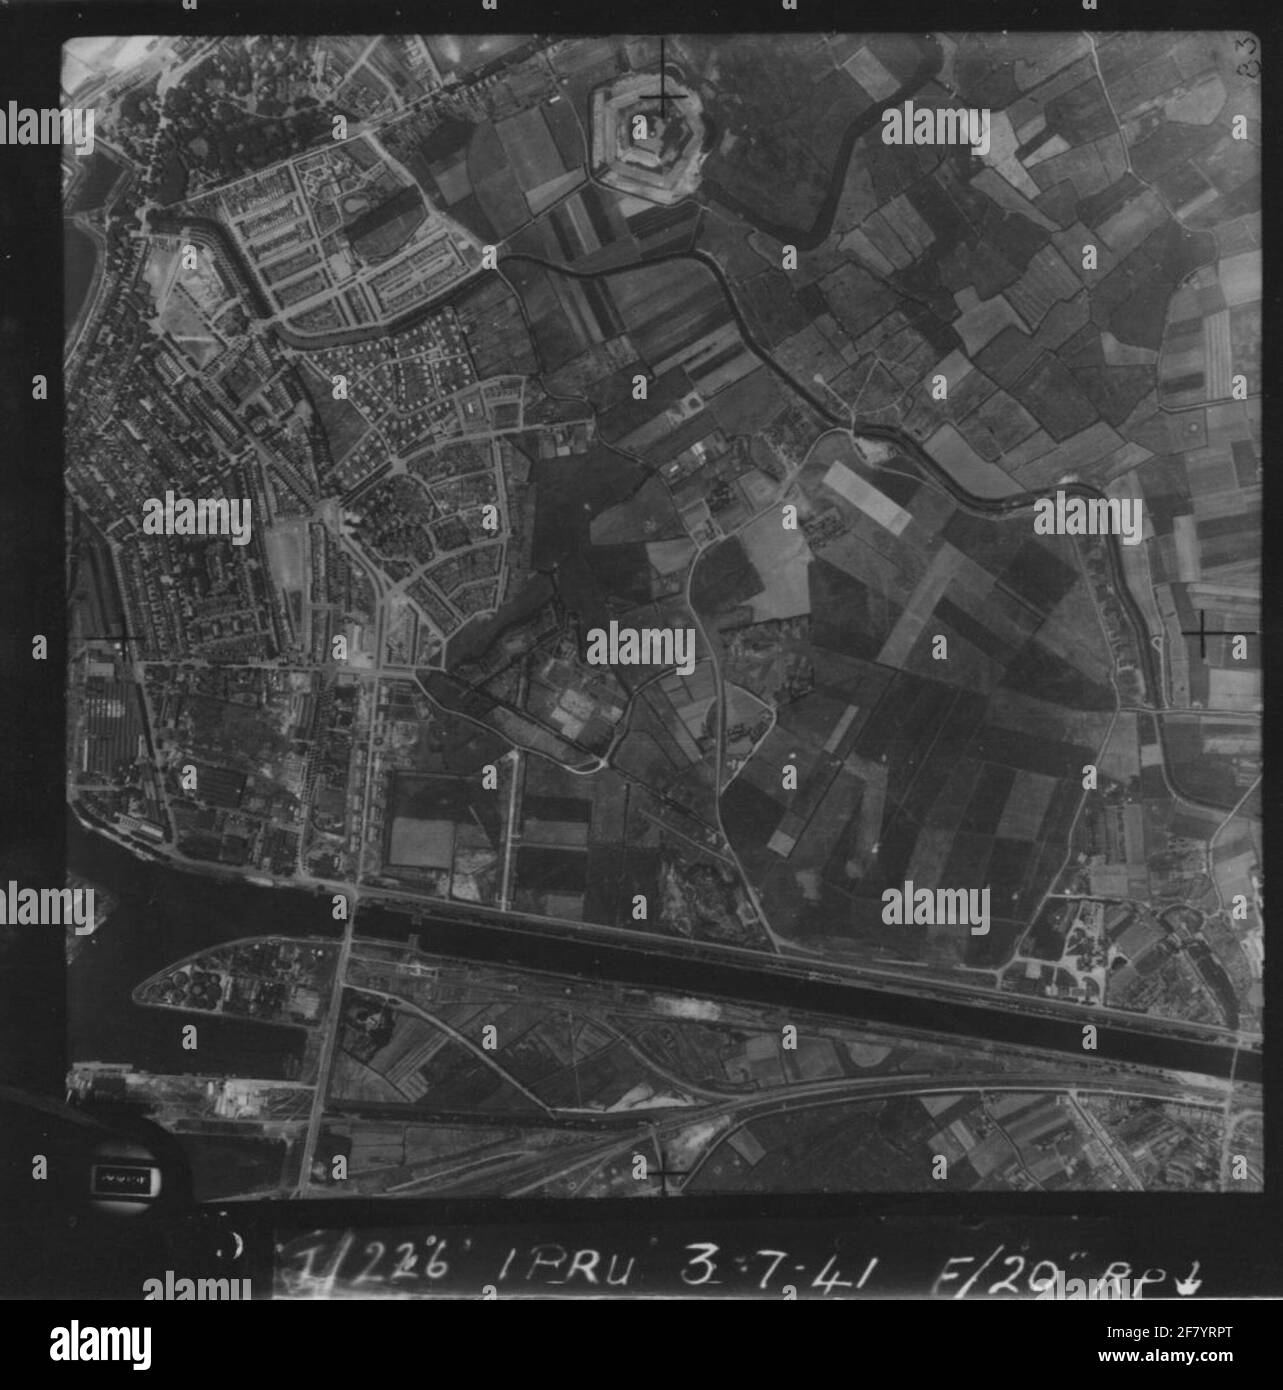 An aerial view of a RAF reconnaissance plane from Vlissingen and surroundings taken on July 3, 1941. Stock Photo